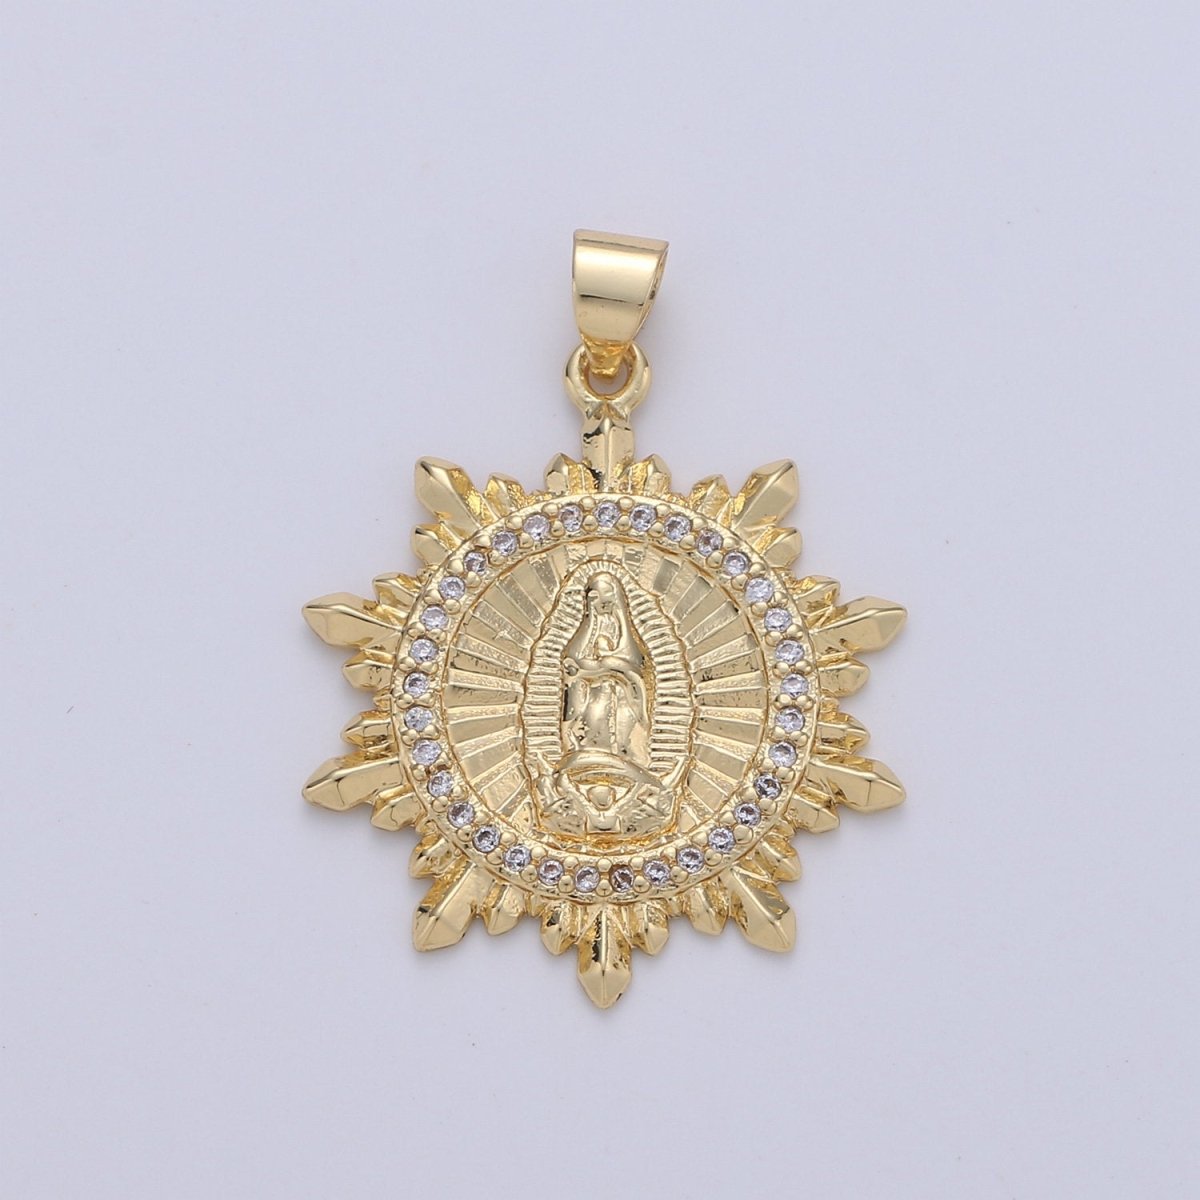 Virgin Mary Medallion Scalloped Edge, Decorative Edge,Round Coin Pendant in 24K Gold Filled Religious Jewelry Charm Pendant for Necklace - DLUXCA